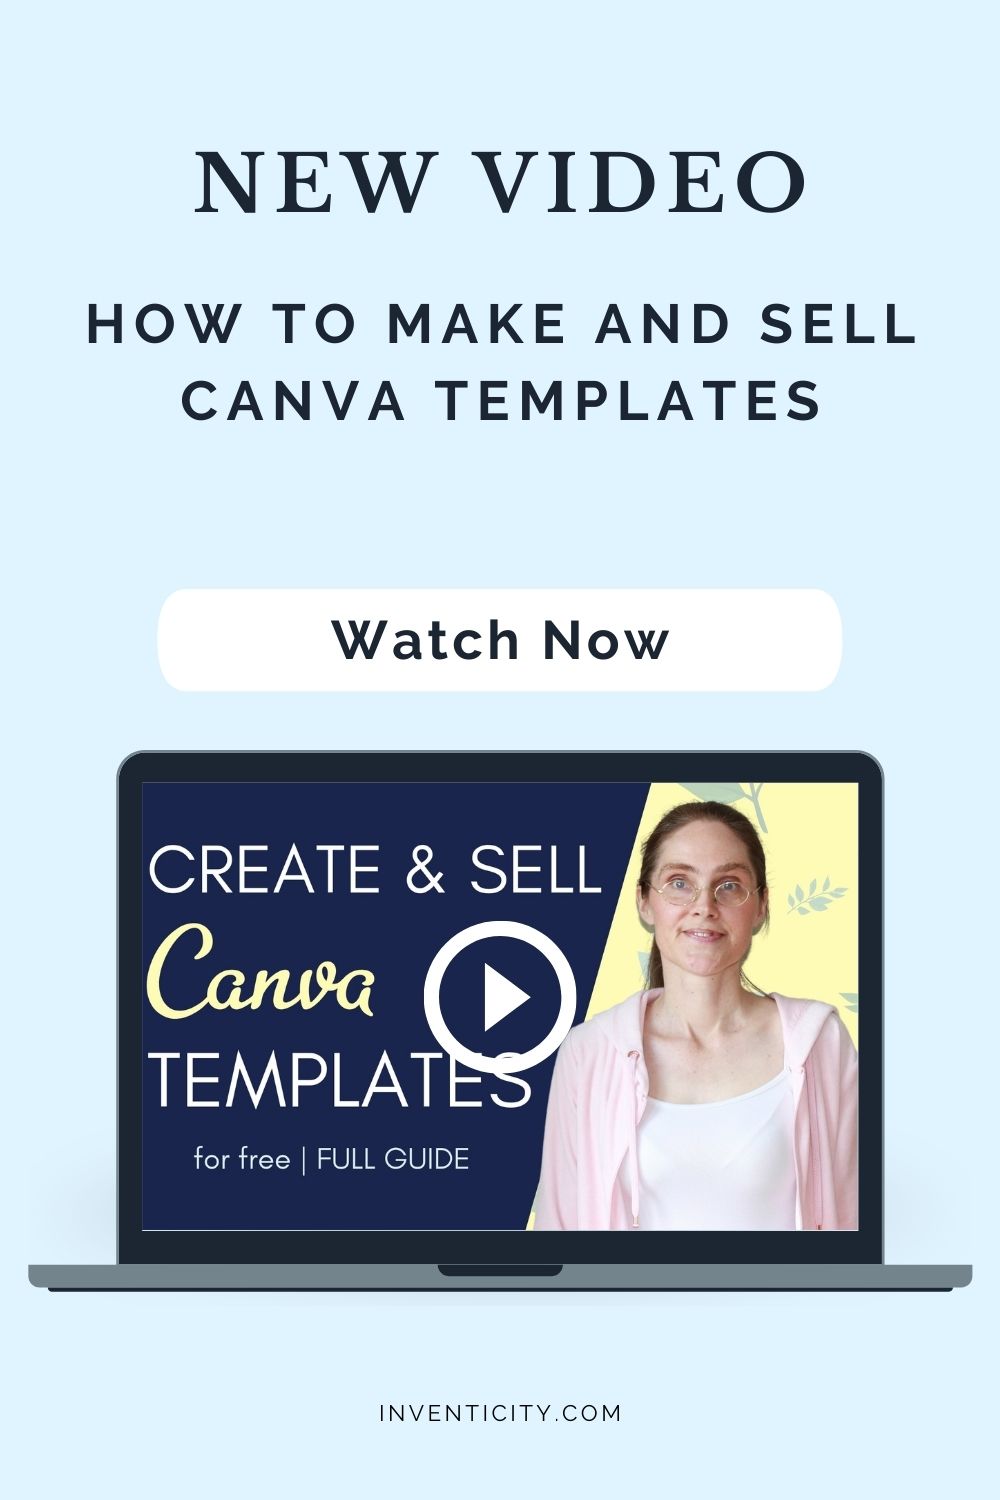 How to Make and Sell Canva Templates and Make Money